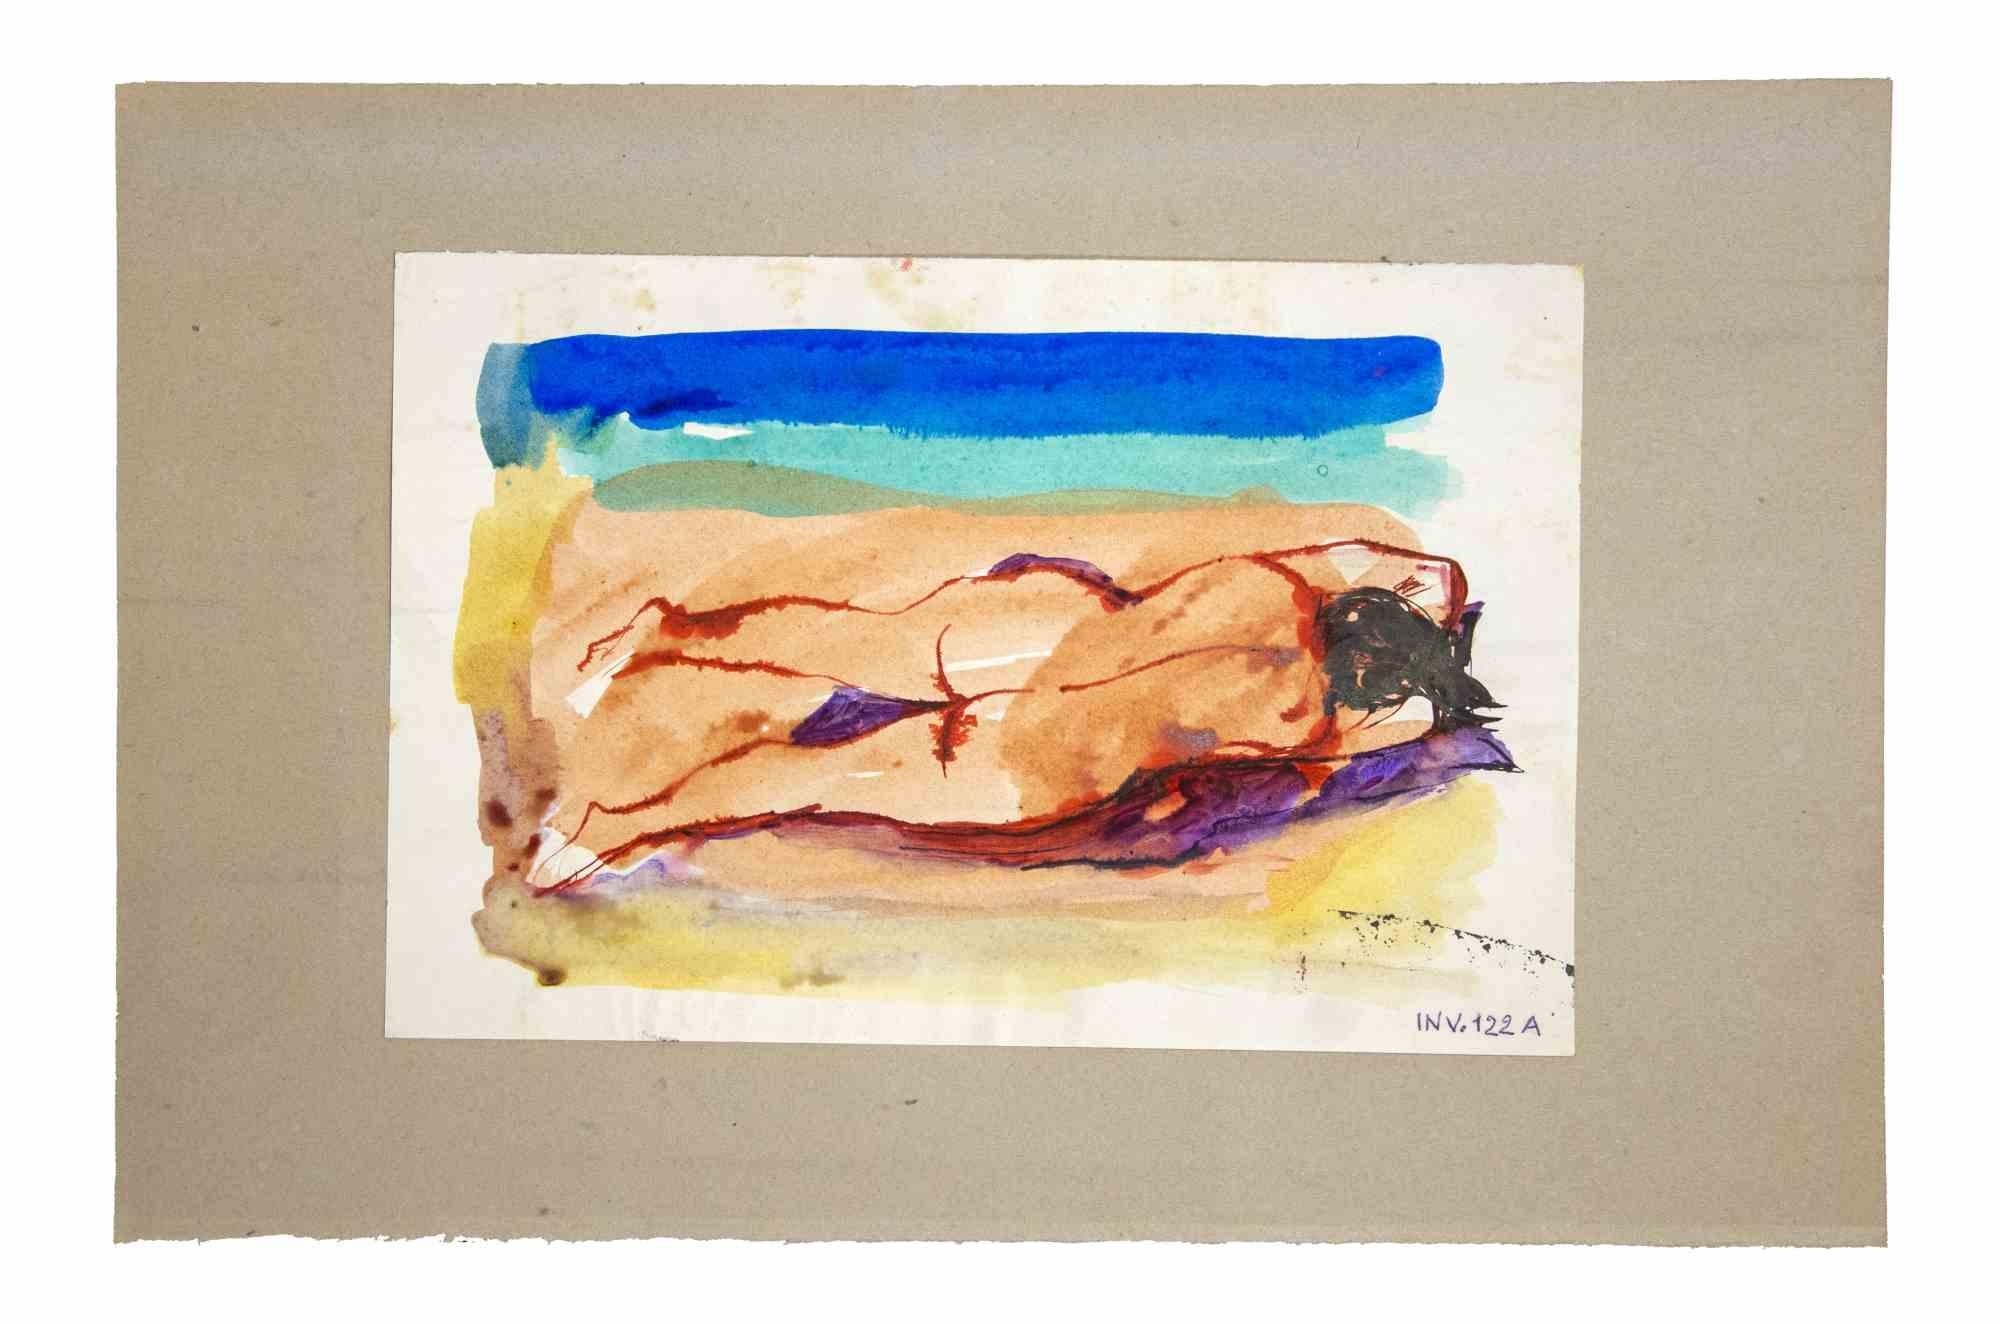 Nude is an original artwork realized in the 1970s by the Italian Contemporary artist  Leo Guida  (1992 - 2017).

Original drawings in China Ink, Charcoal, and Watercolor on paper.

Good conditions except for some foxings.

The artwork is depicted